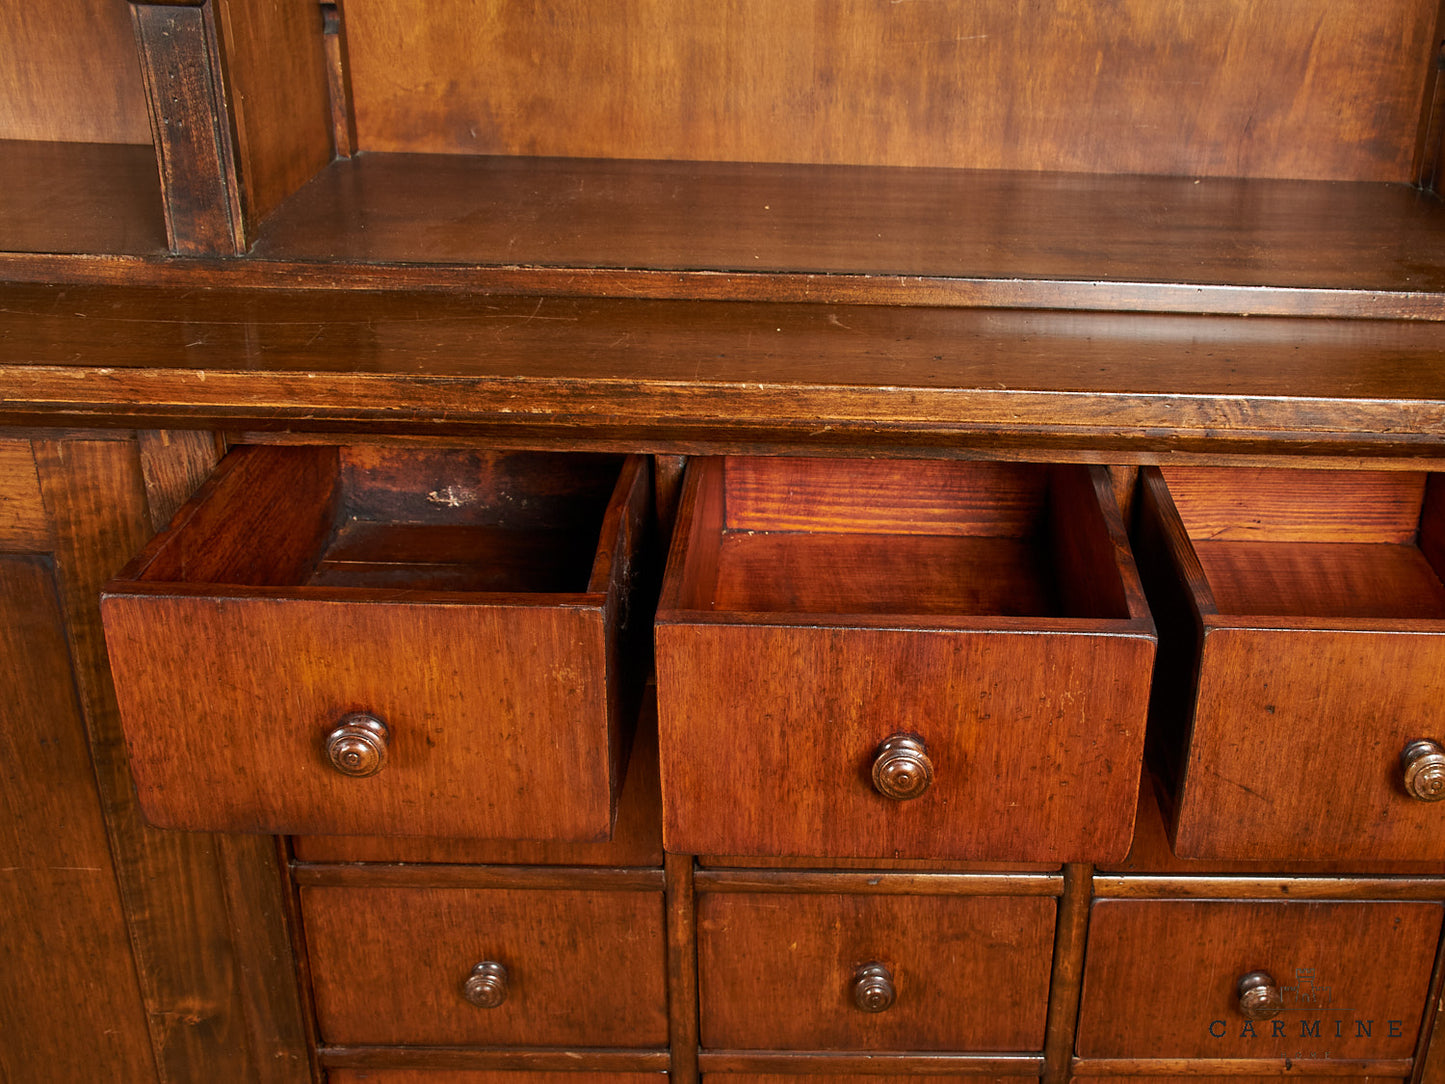 Apothecary cabinet, mid-20th century